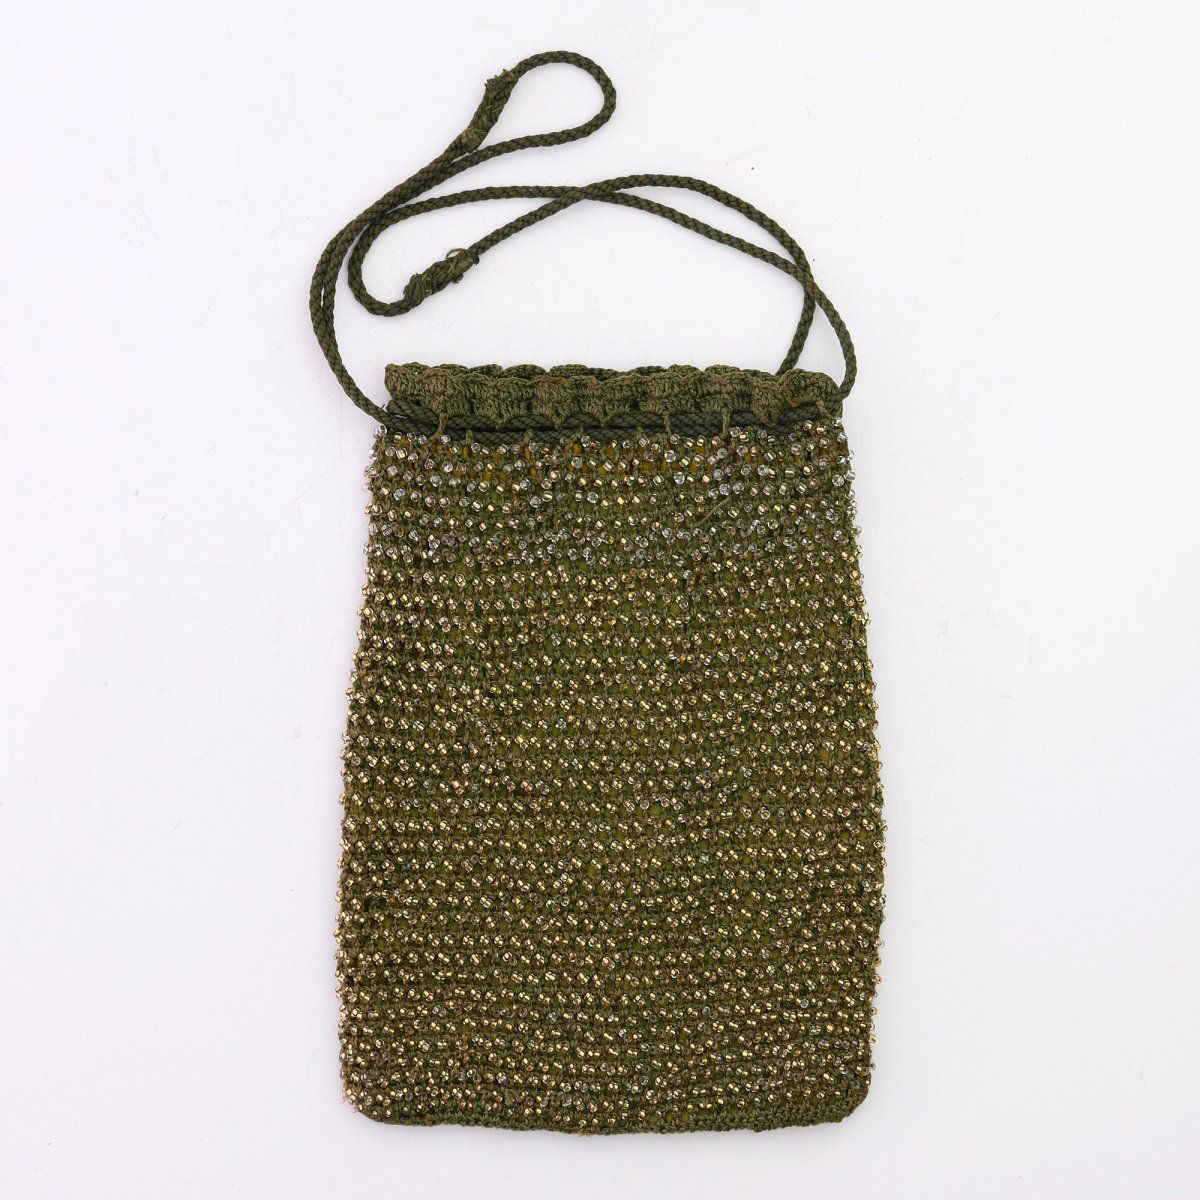 Null Monochromatic pouch, c. 1900, H. 18 x 12.5 cm. Crocheted, with clear, gold &hellip;